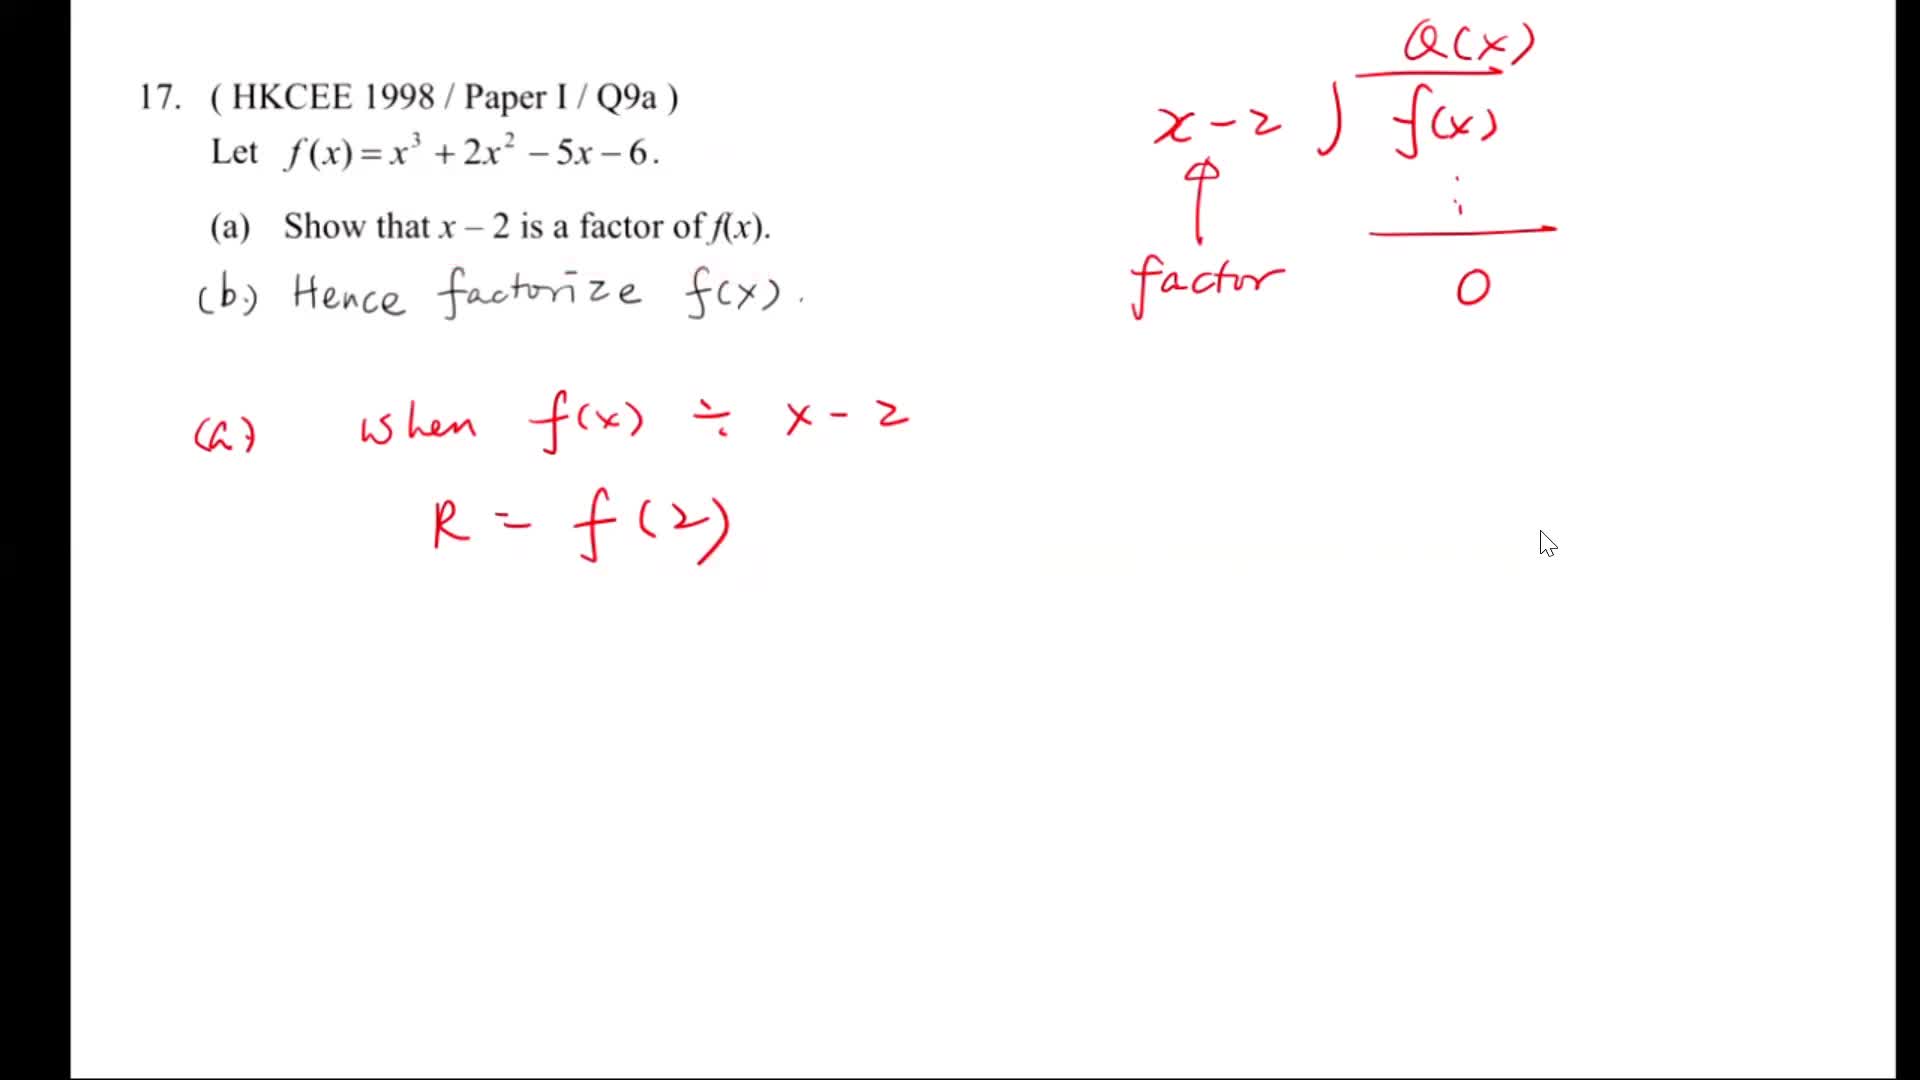 s4_math_HKDSE_Polynomial(2)_HKCEE_factor_thm